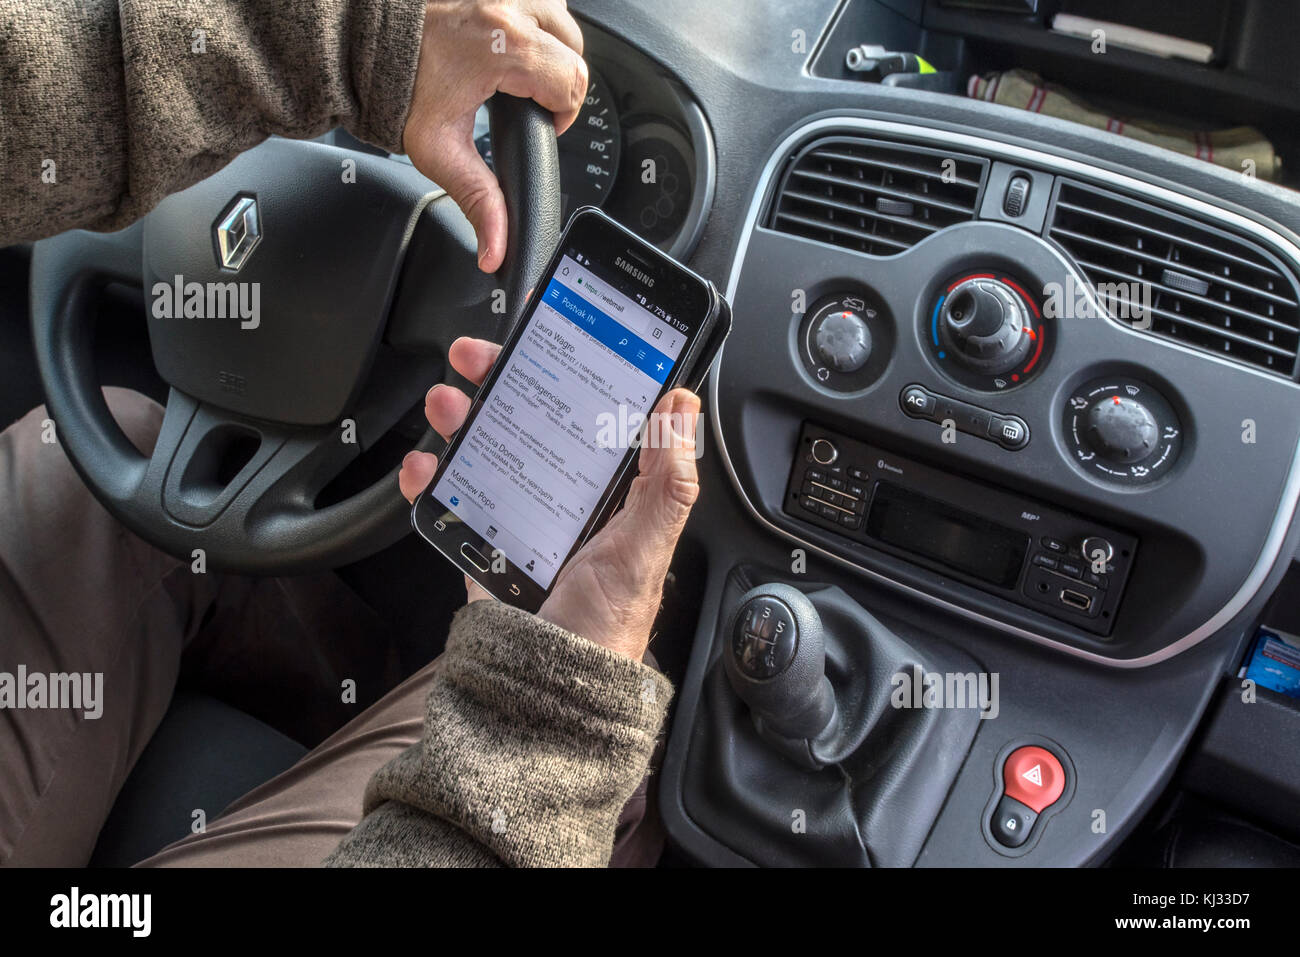 Irresponsible man at steering wheel checking messages on smart phone / smartphone / cellphone while driving car on road Stock Photo